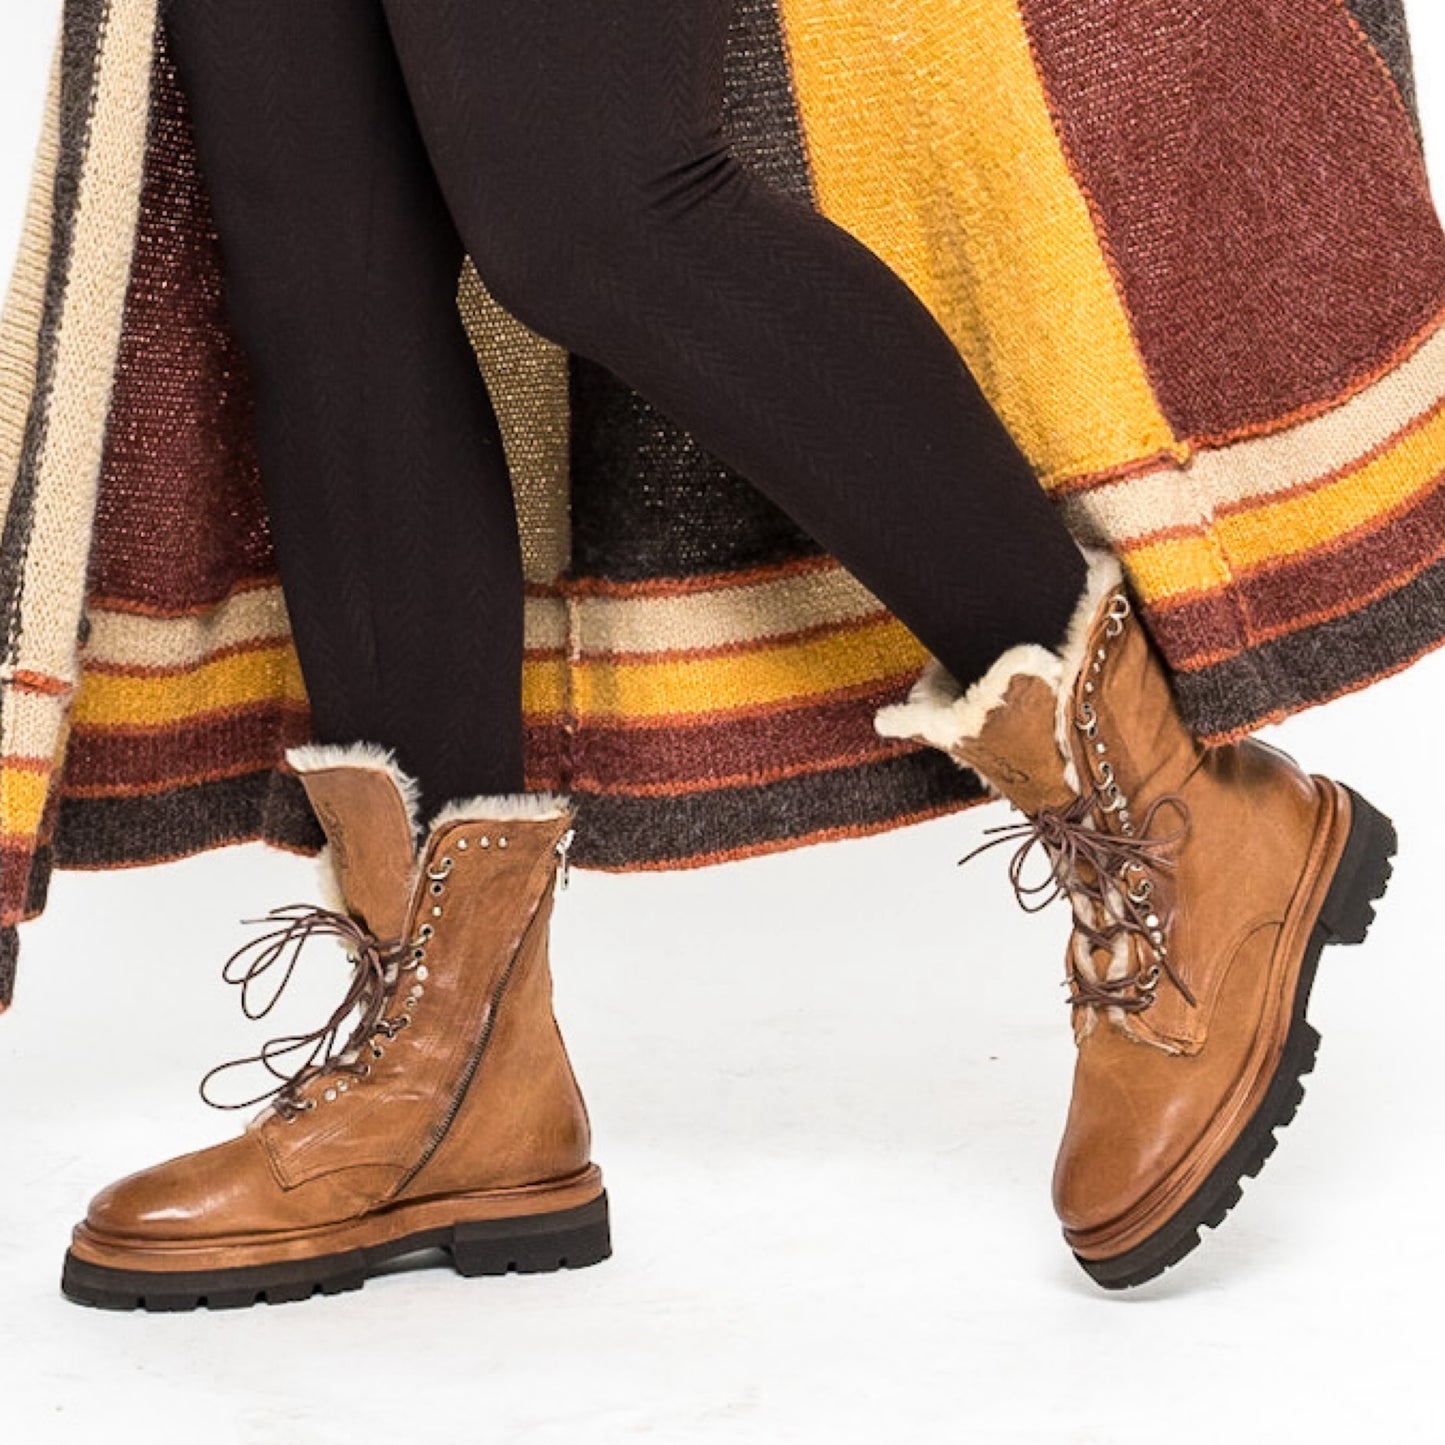 Rings of Comfort Level Leather Booties